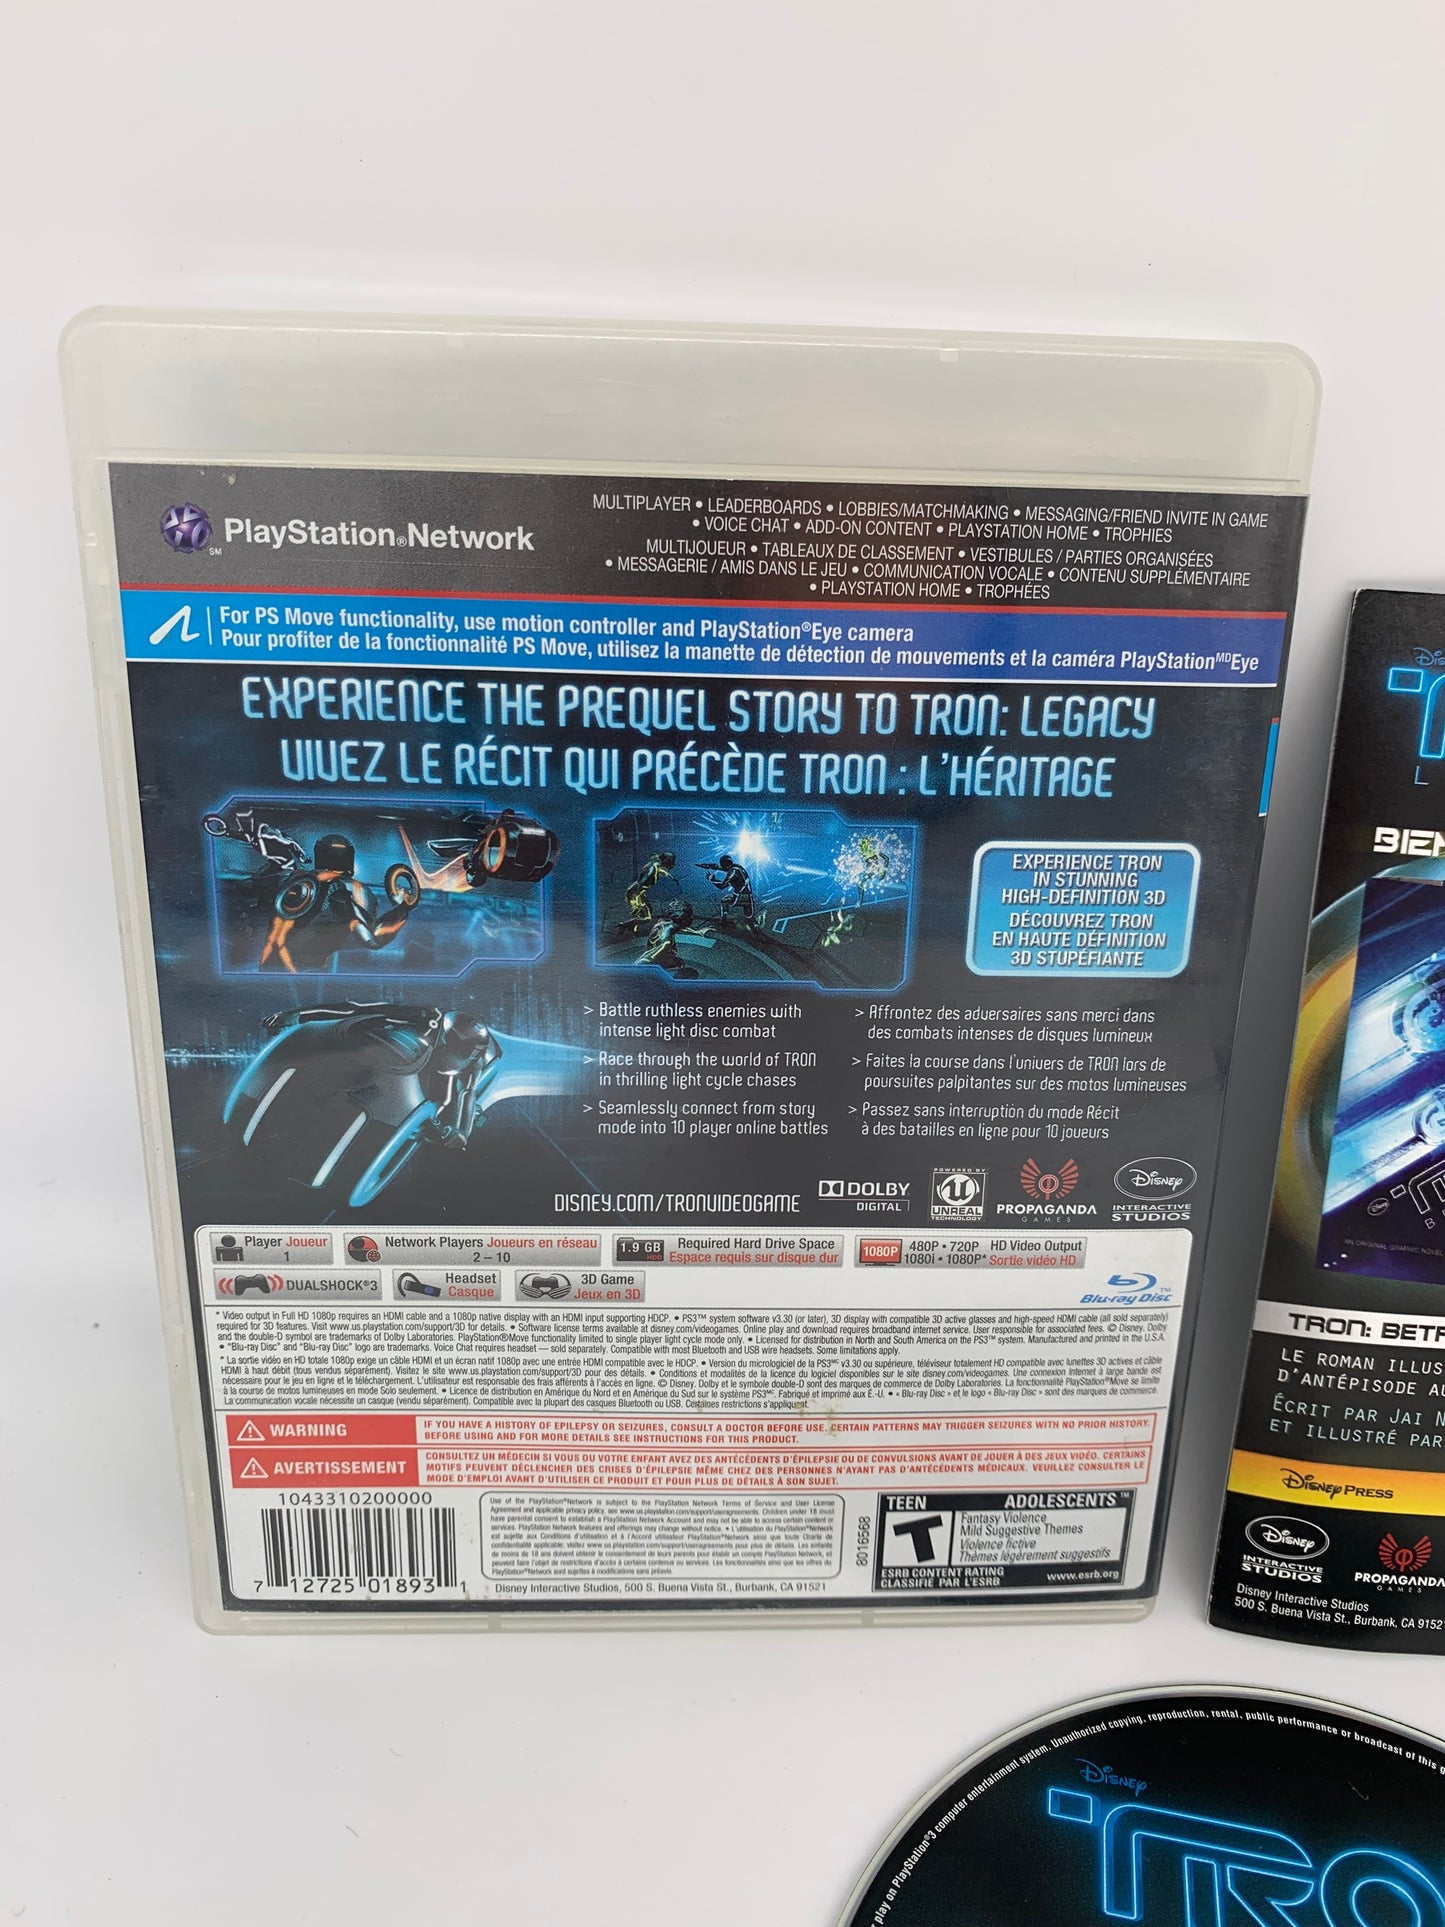 SONY PLAYSTATiON 3 [PS3] | TRON EVOLUTiON